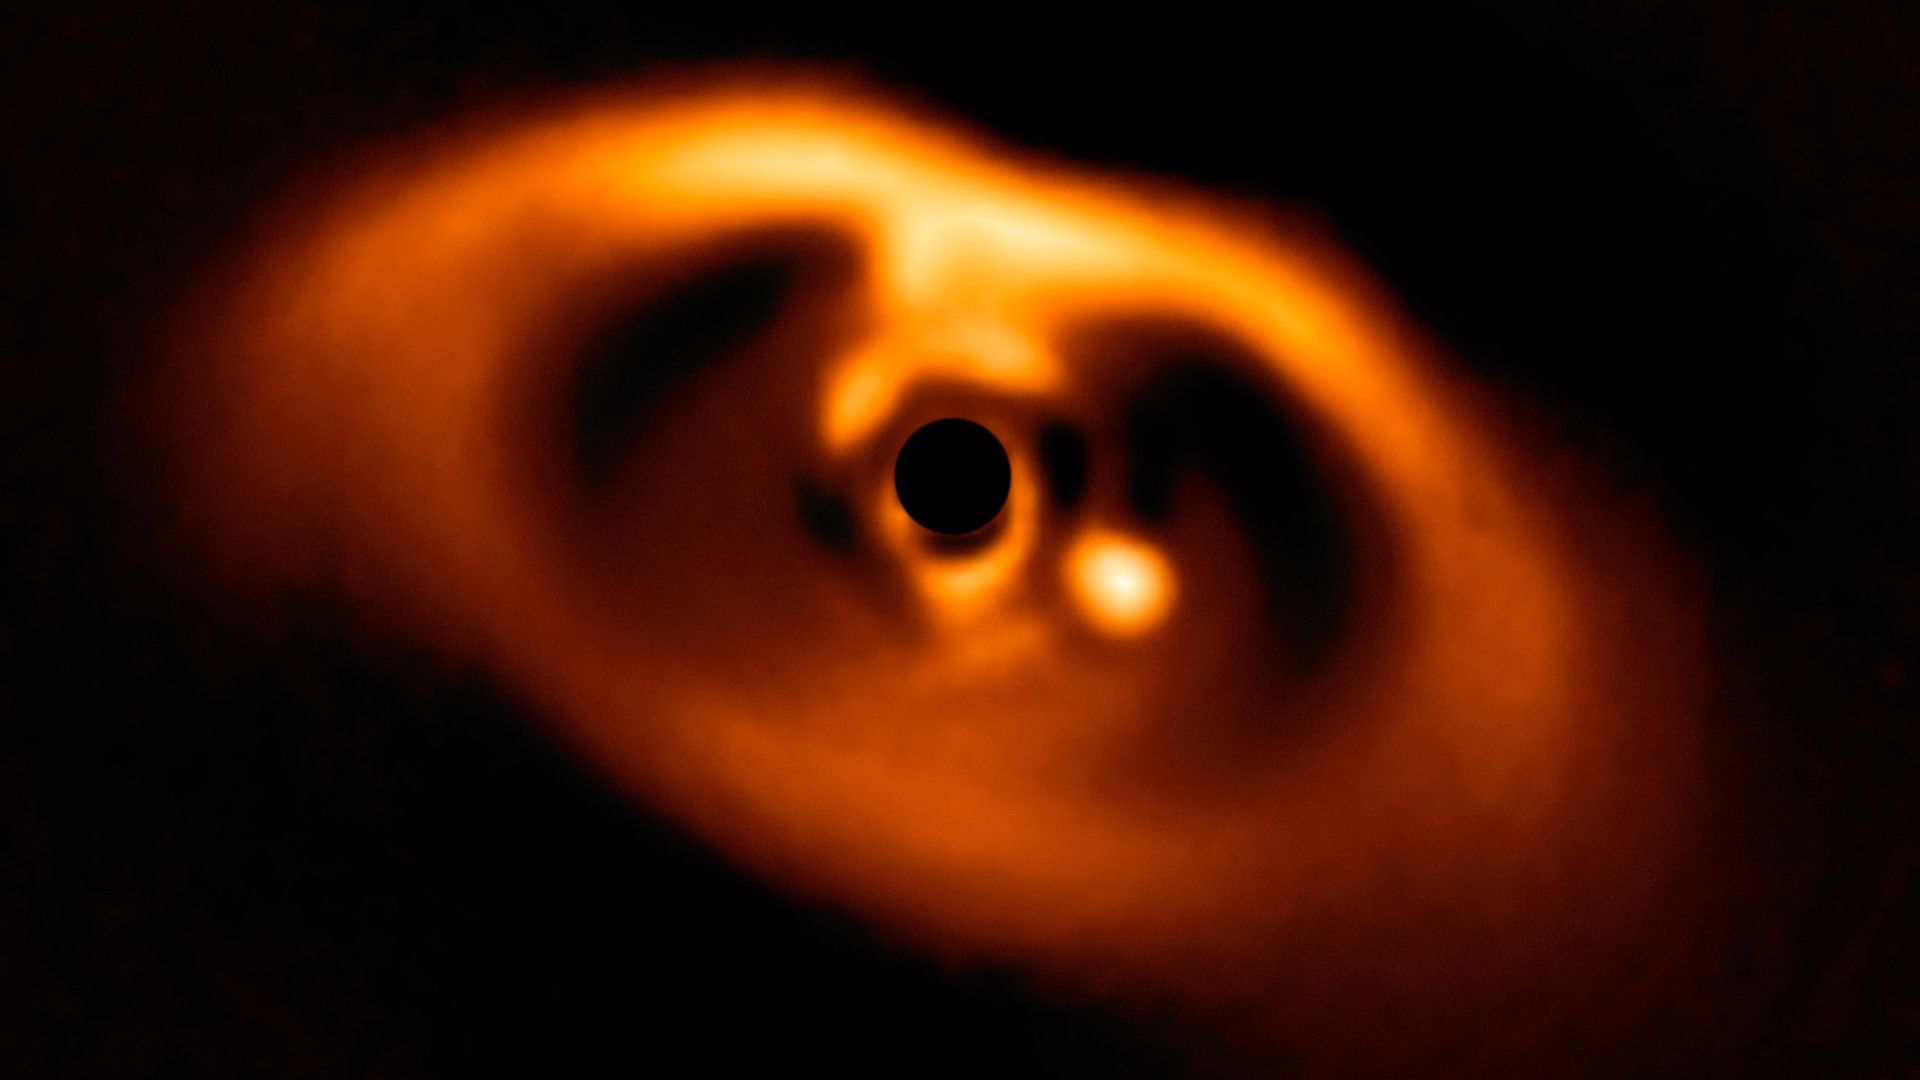 Image from the SPHERE instrument on ESO's Very Large Telescope showing a planet forming around the dwarf star PDS 70. 